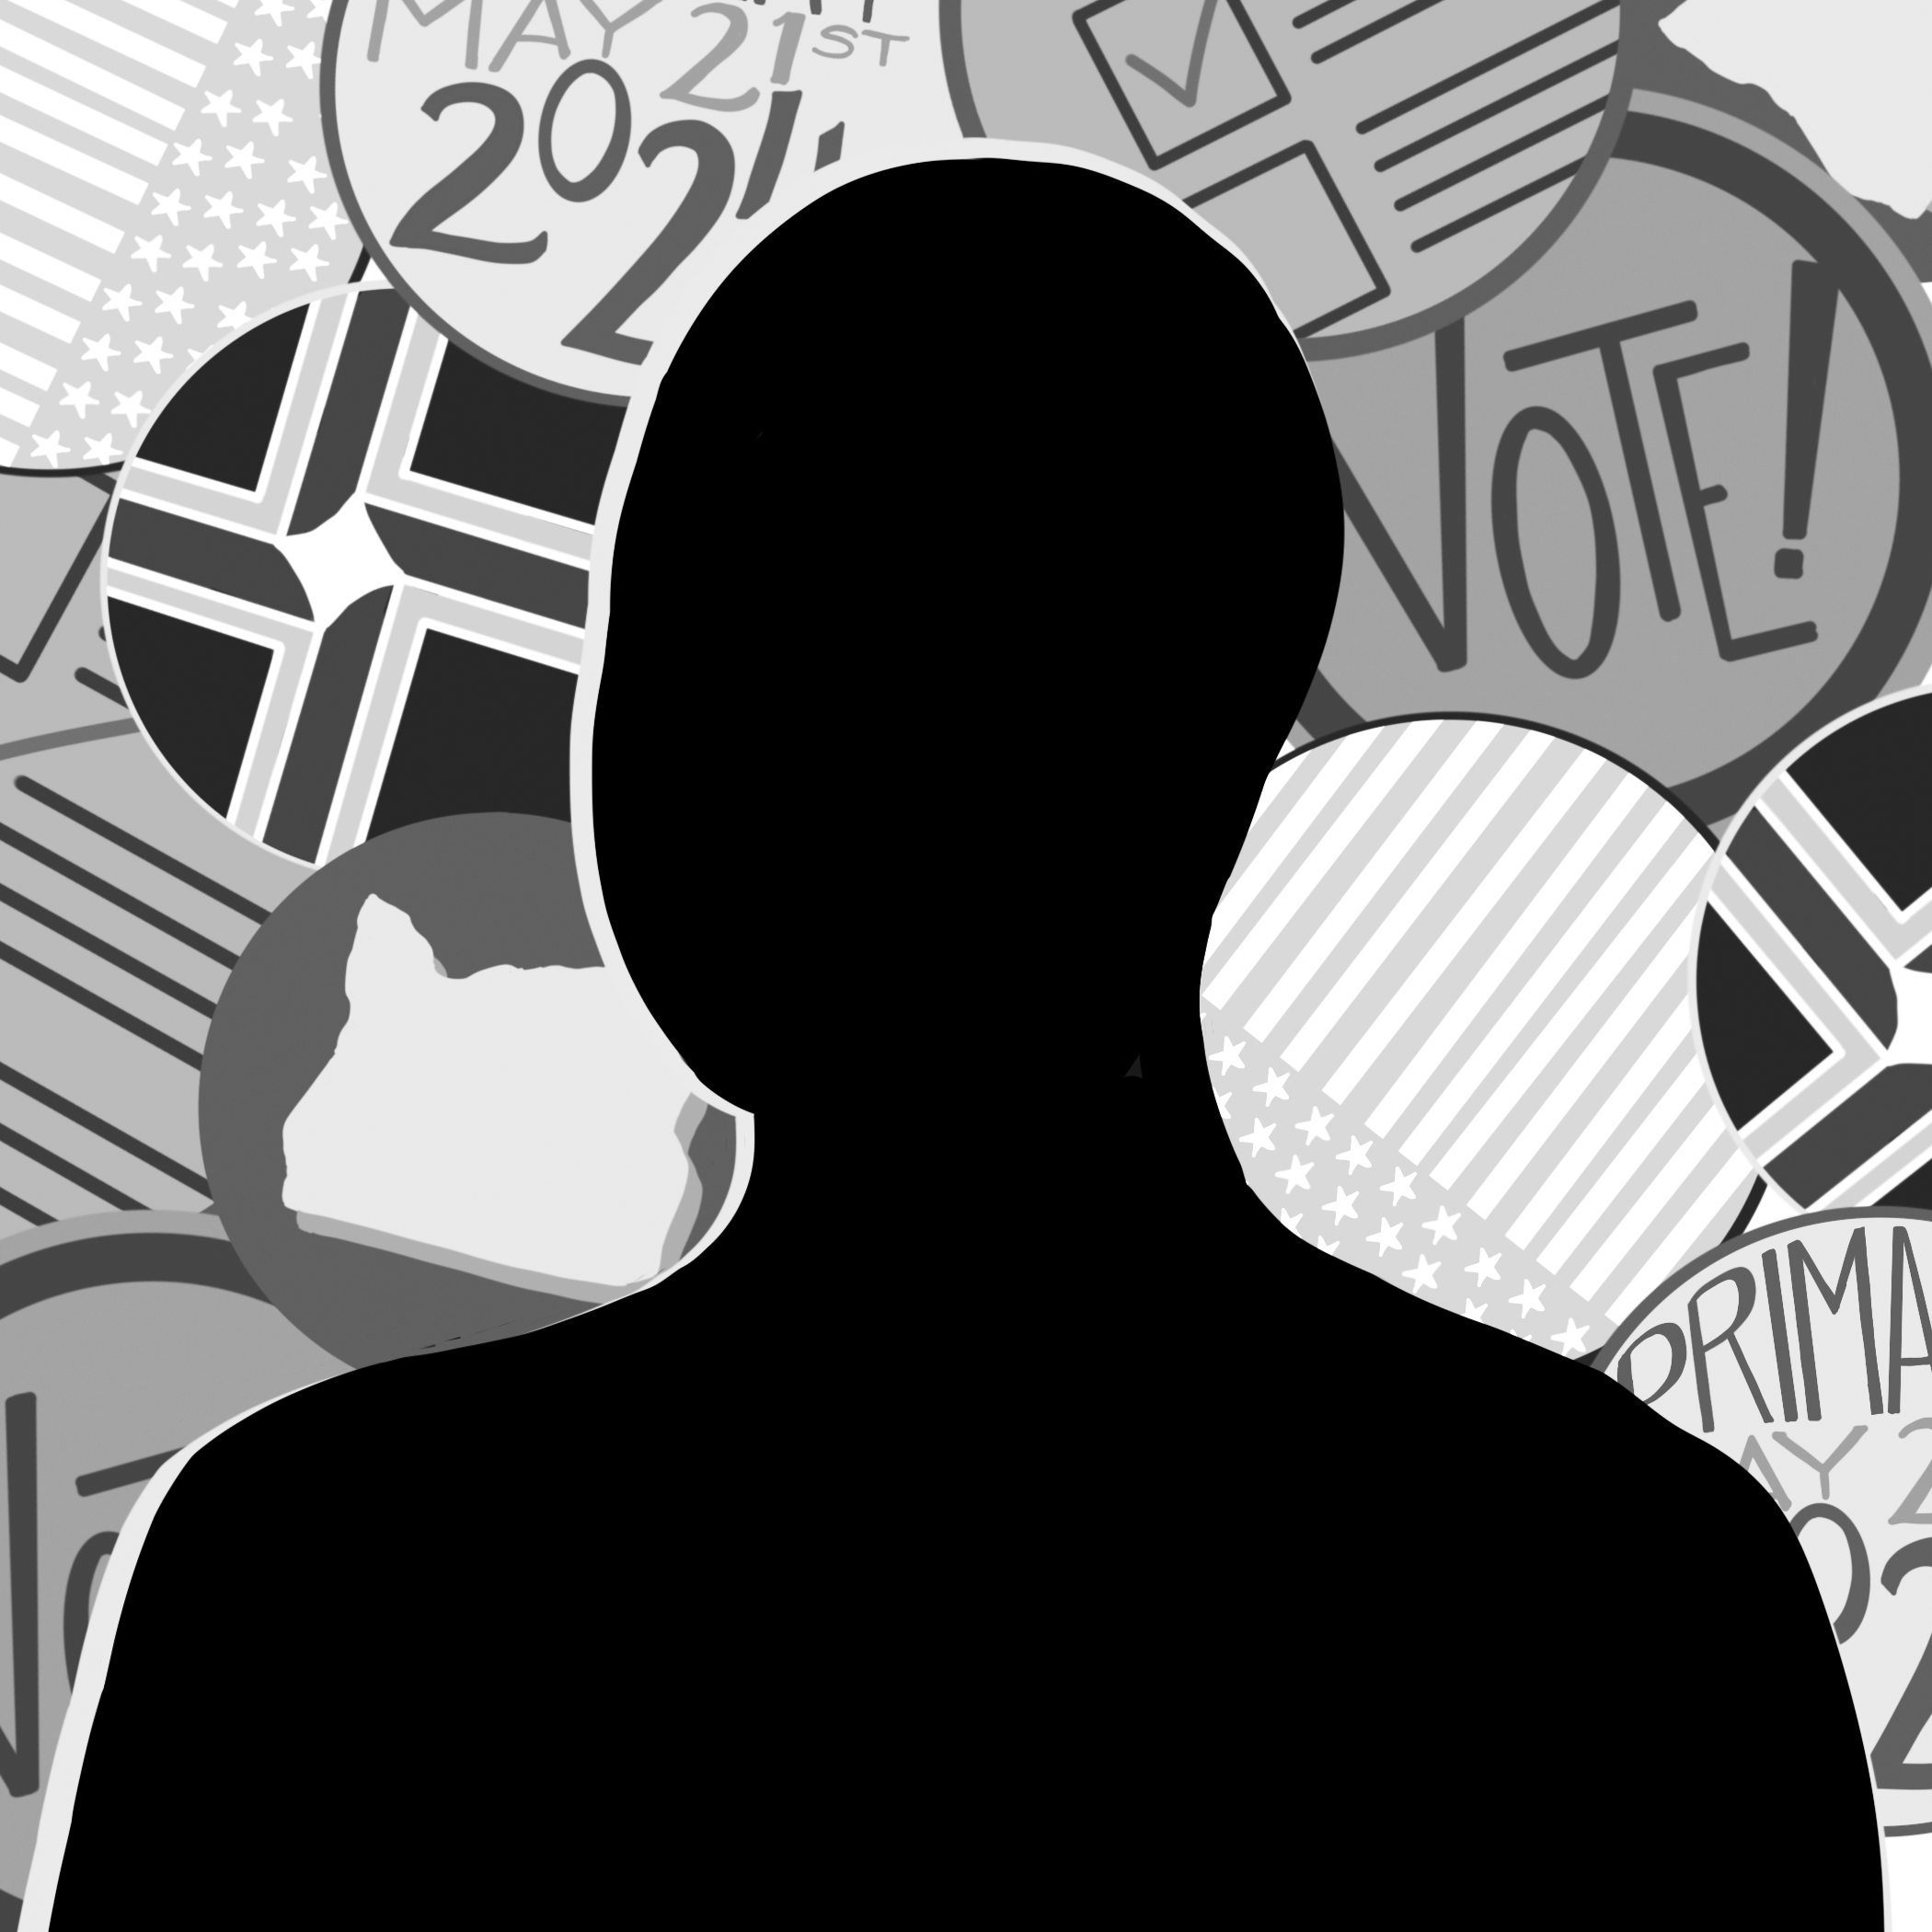 Silhouette of a figure on a background of voting themed buttons.